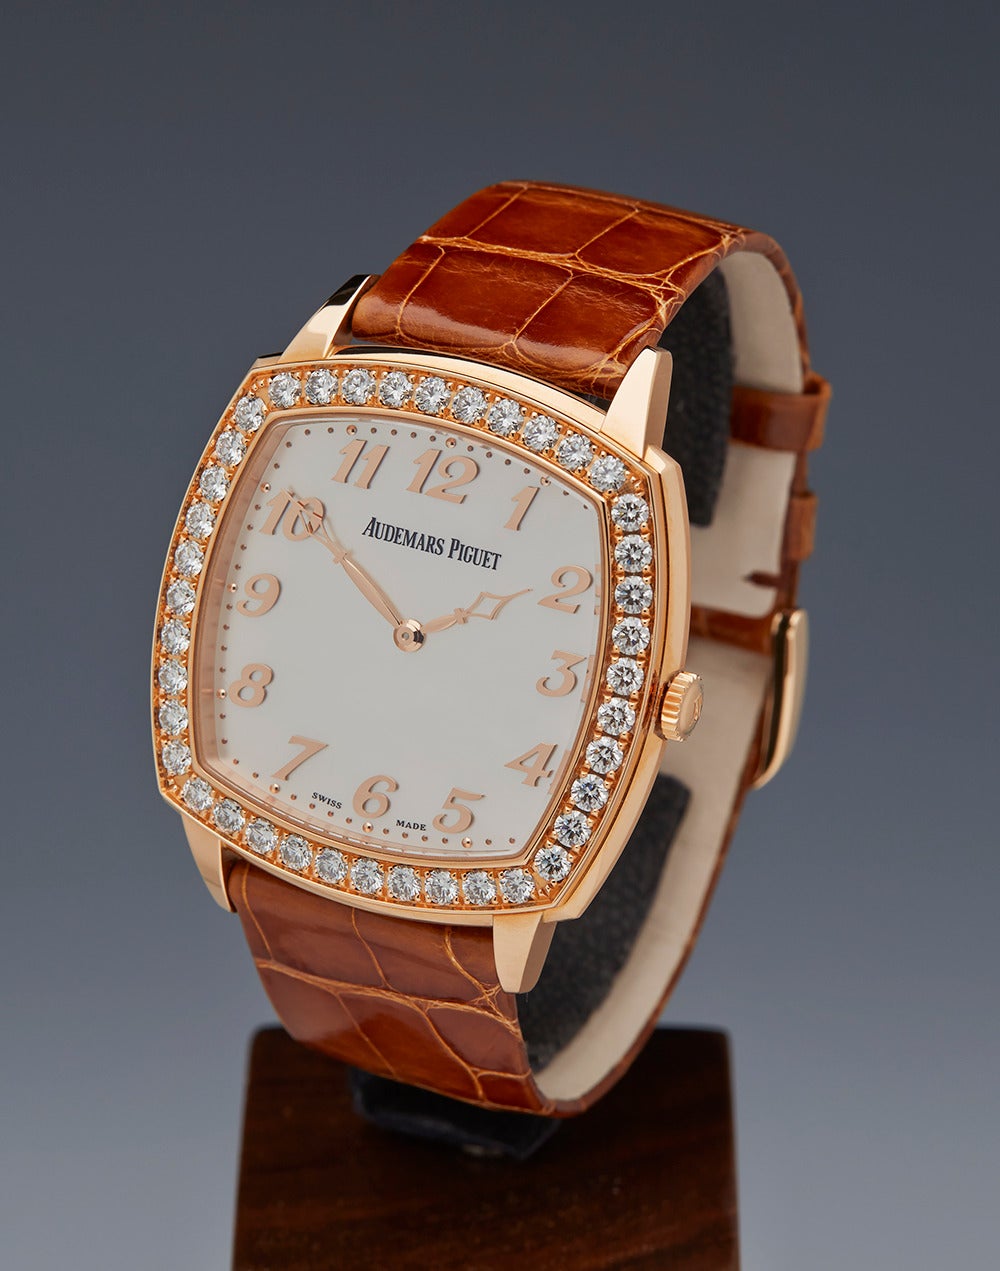 Specifications

Ref:W1458
Movement: Automatic 
Case: 18k Rose Gold
Case Diameter: 41mm
Dial: White Mother of Pearl
Bracelet: Brown Crocodile Leather
Strap Length: Adjustable up to 20cm
Strap Width: At Case - 22mm. At Buckle - 18mm
Buckle: 18k Rose